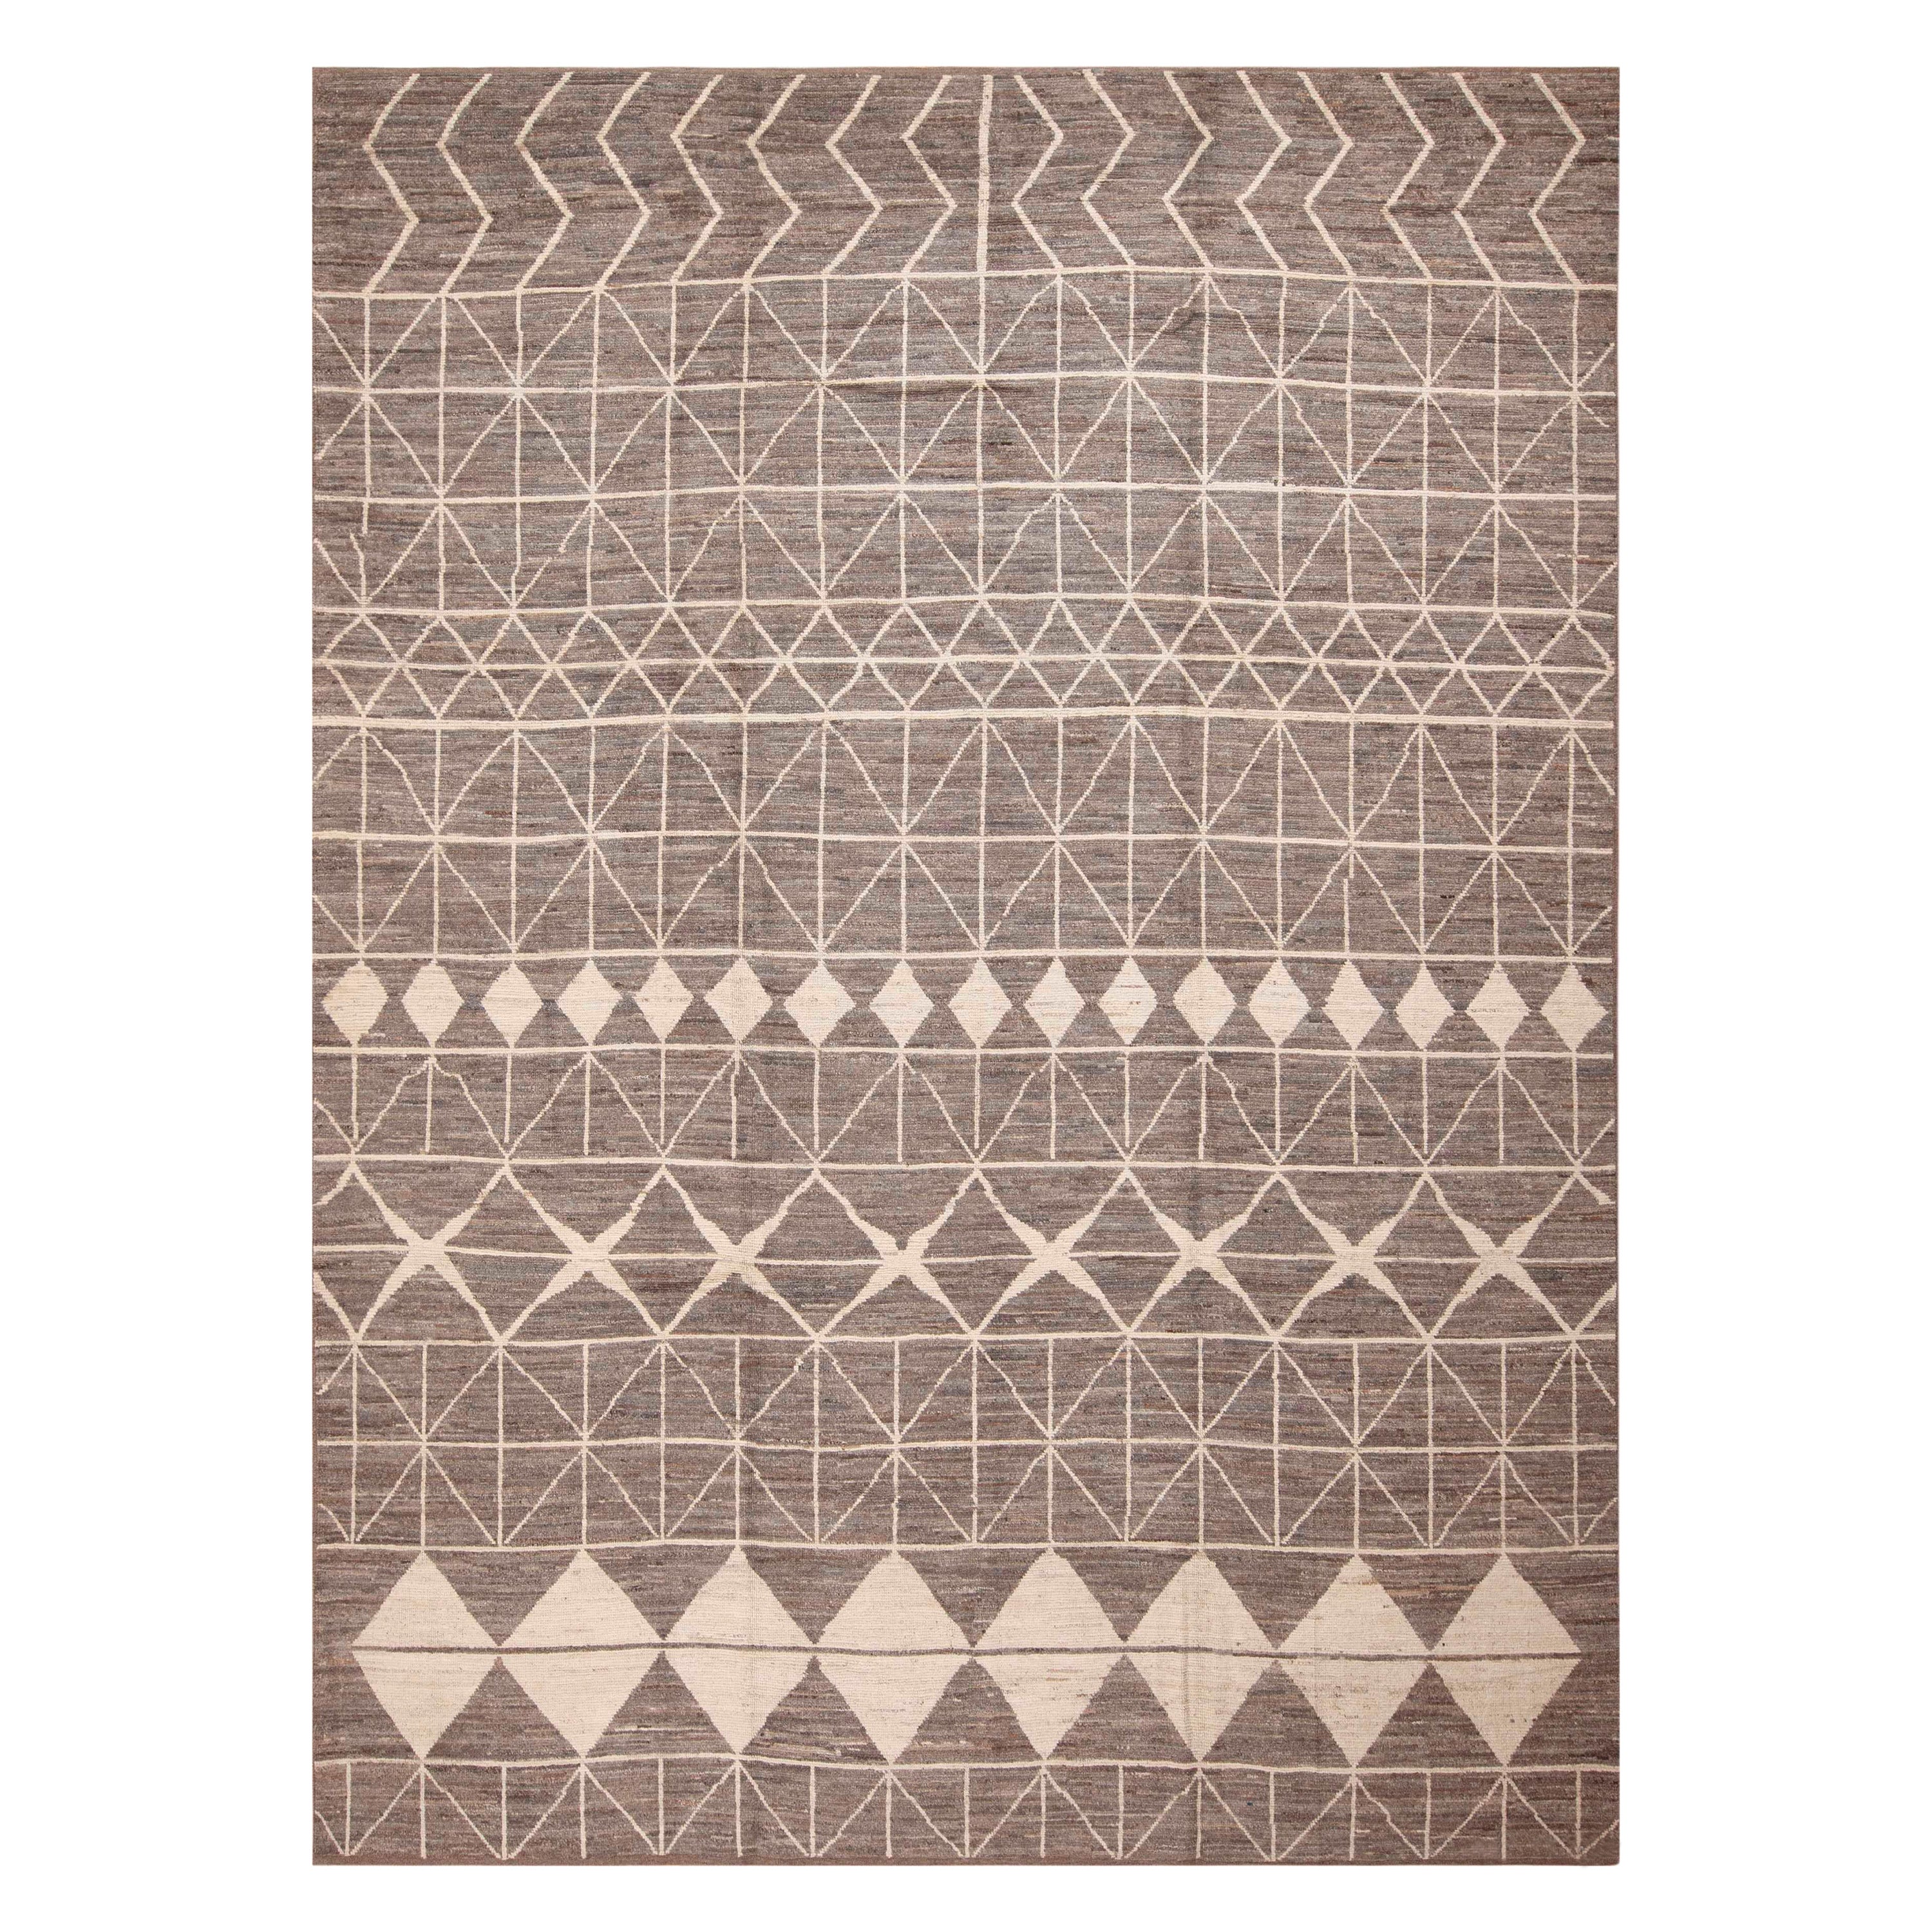 Nazmiyal Collection Gray and Cream Color Tribal Design Modern Rug 9'10" x 13'2" For Sale